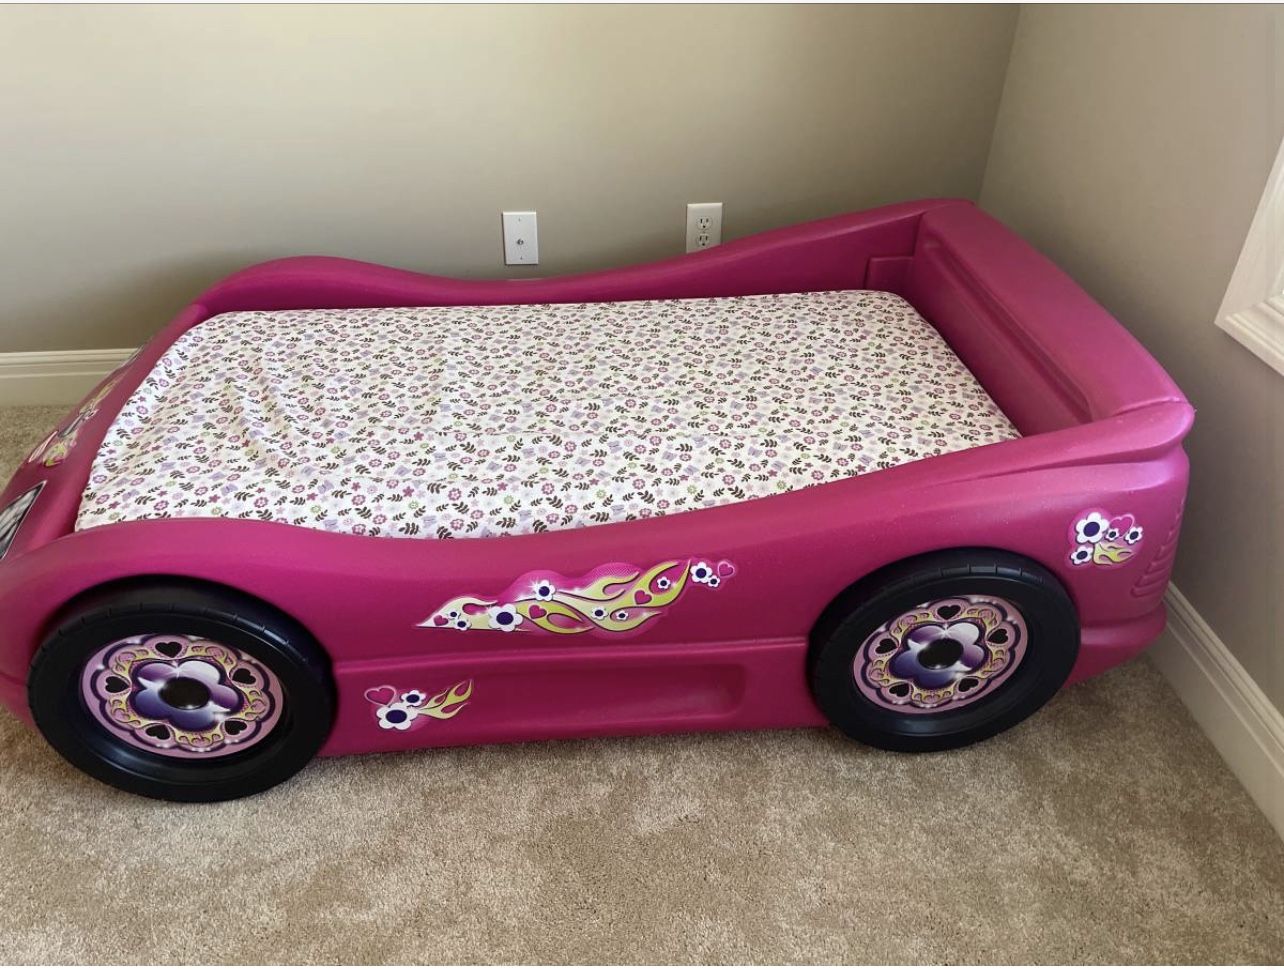 Car bed 150$ With mattress